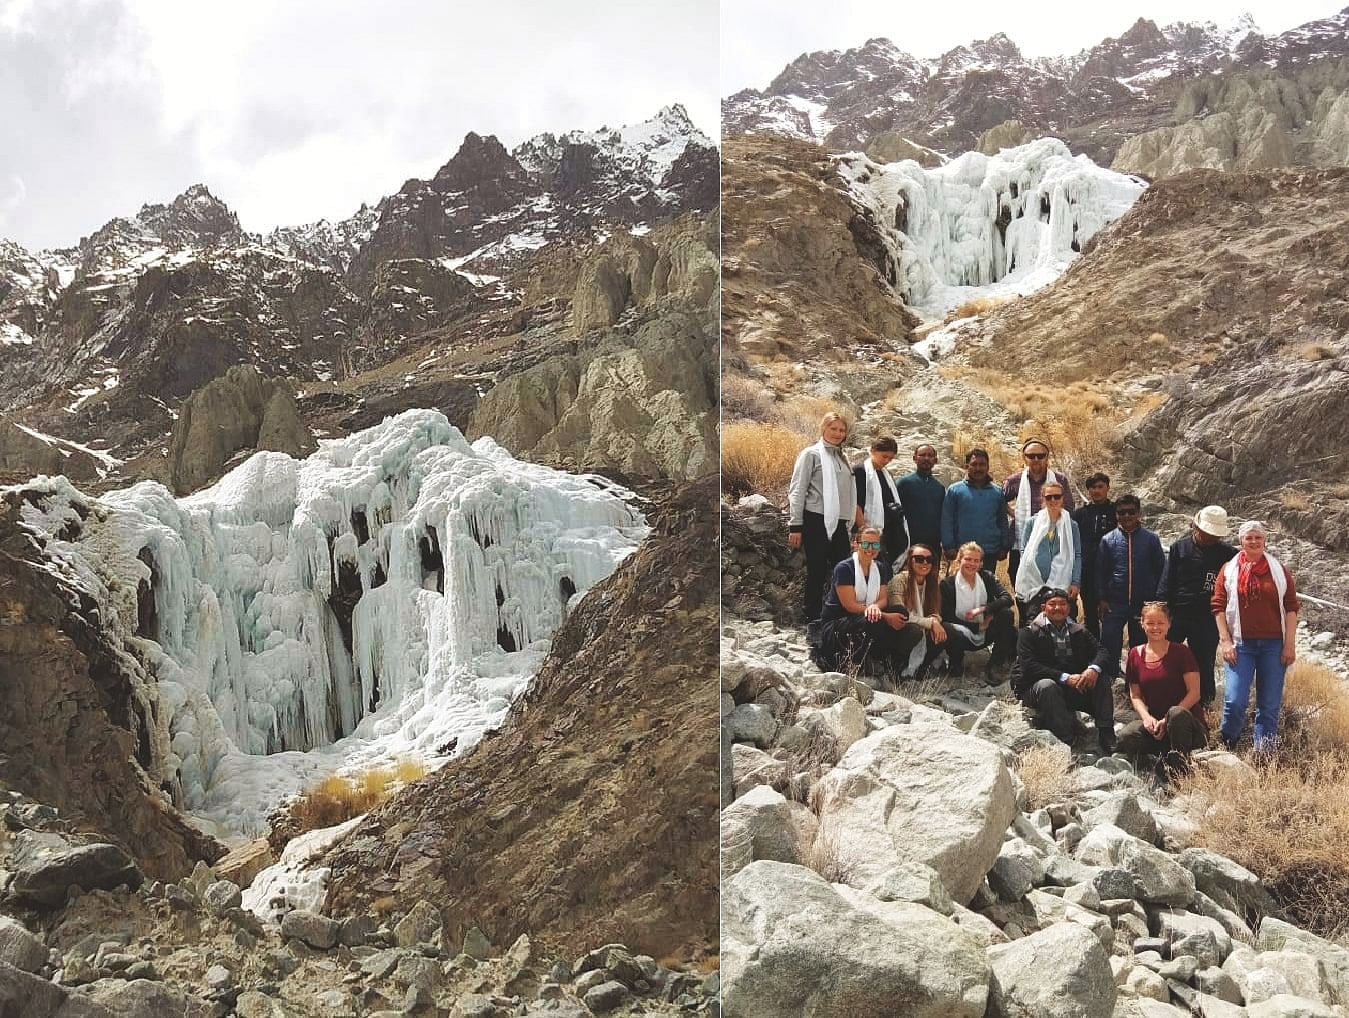 ladakh is future-proofing against climate change with ice stupas—less snow, melting glaciers